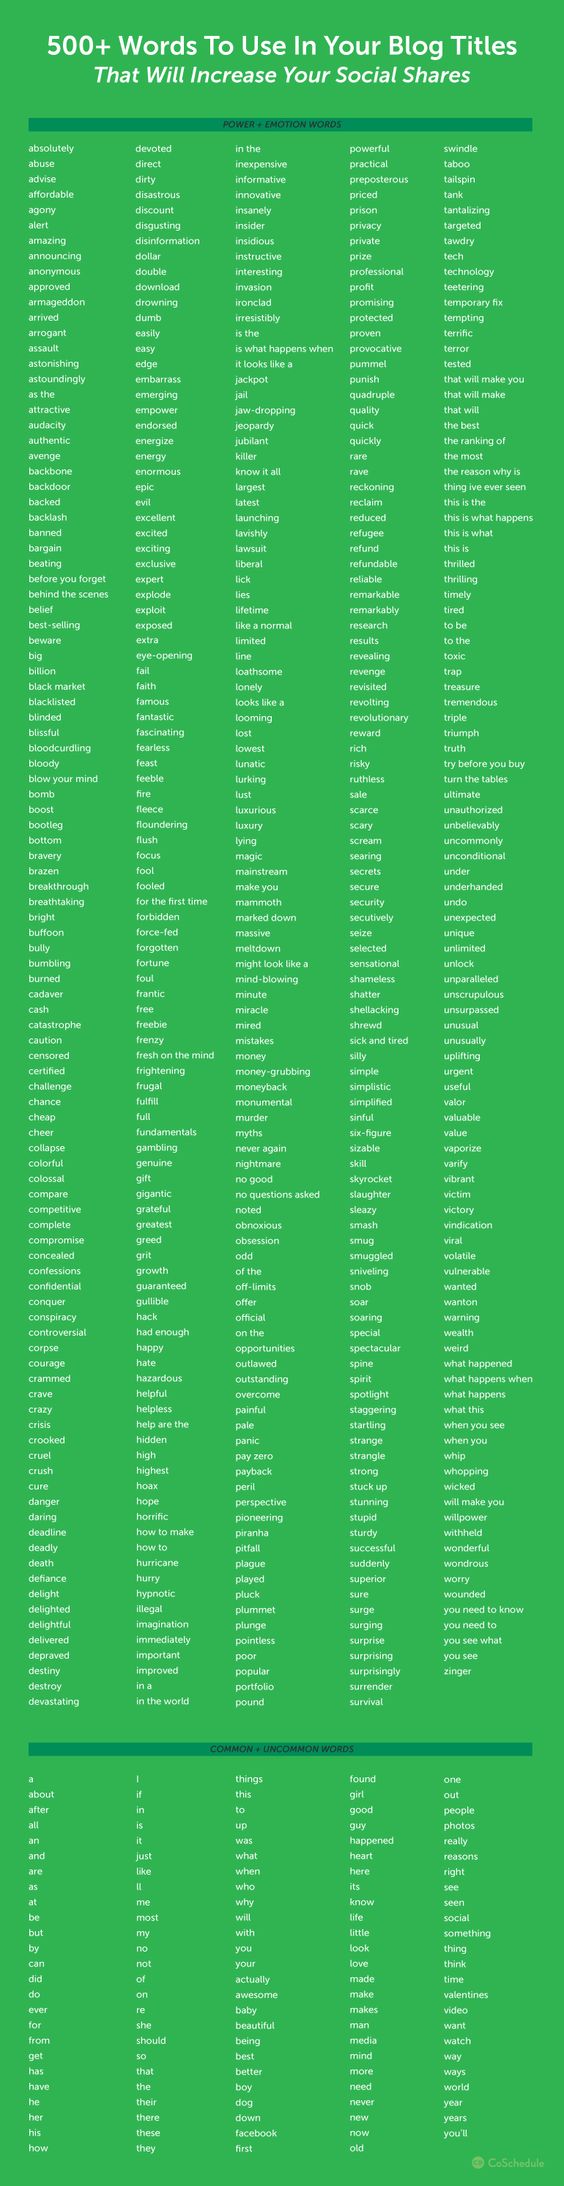 500+ words to use in blog titles graphic